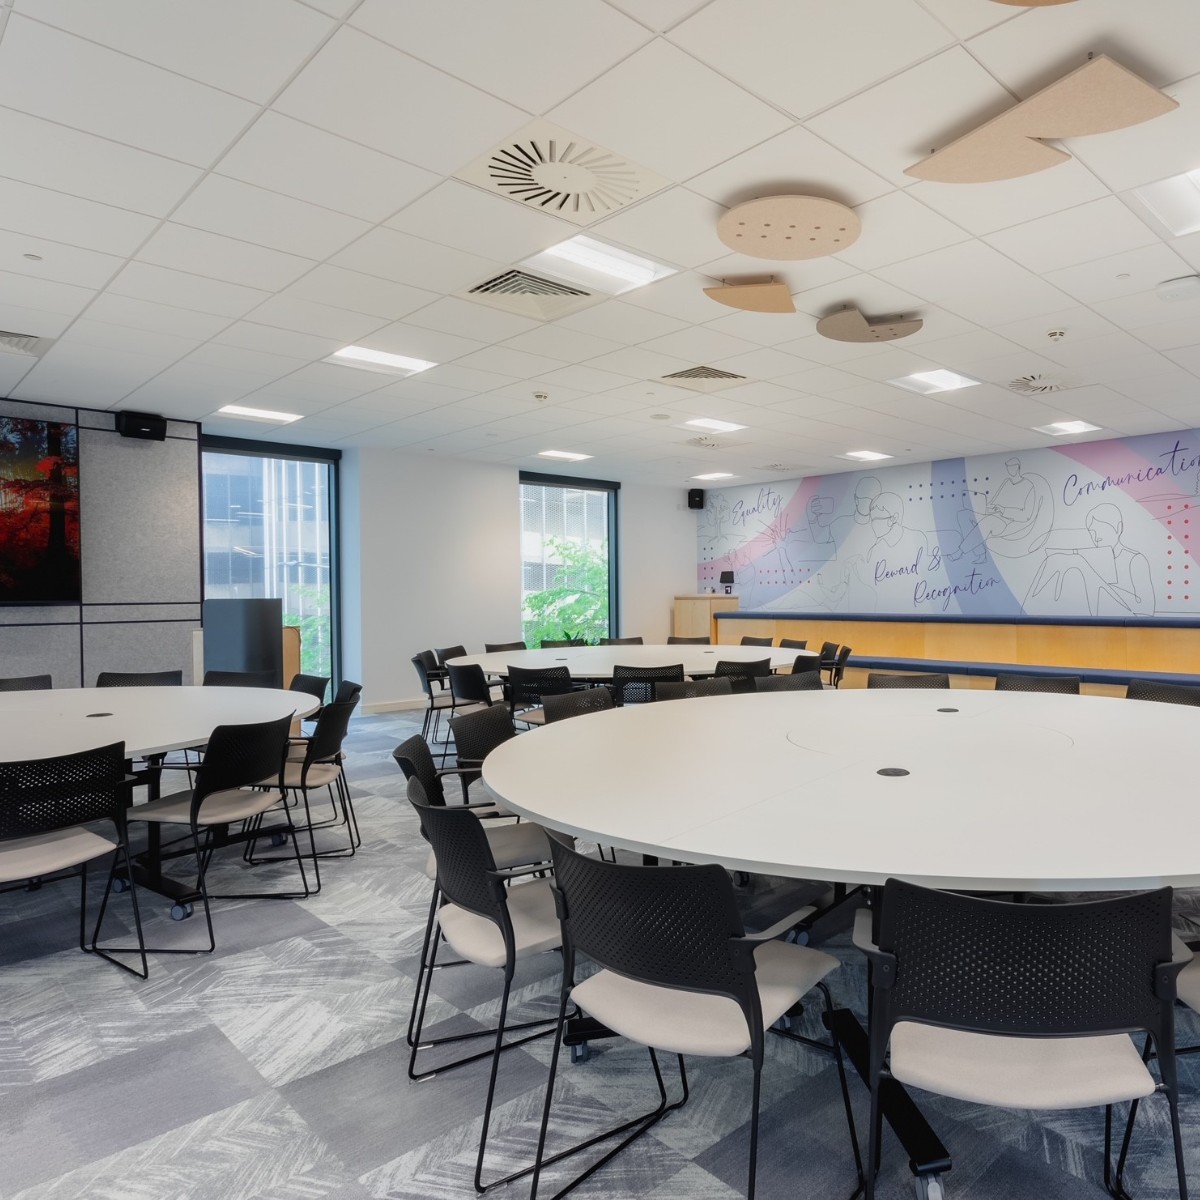 Our Facilities team has transformed our first floor to a modern, fresh space built with seamless collaboration in mind. A huge thank you to @ClaremontGroup for working with us on this project, helping us to spark that feeling of togetherness for our colleagues even more!